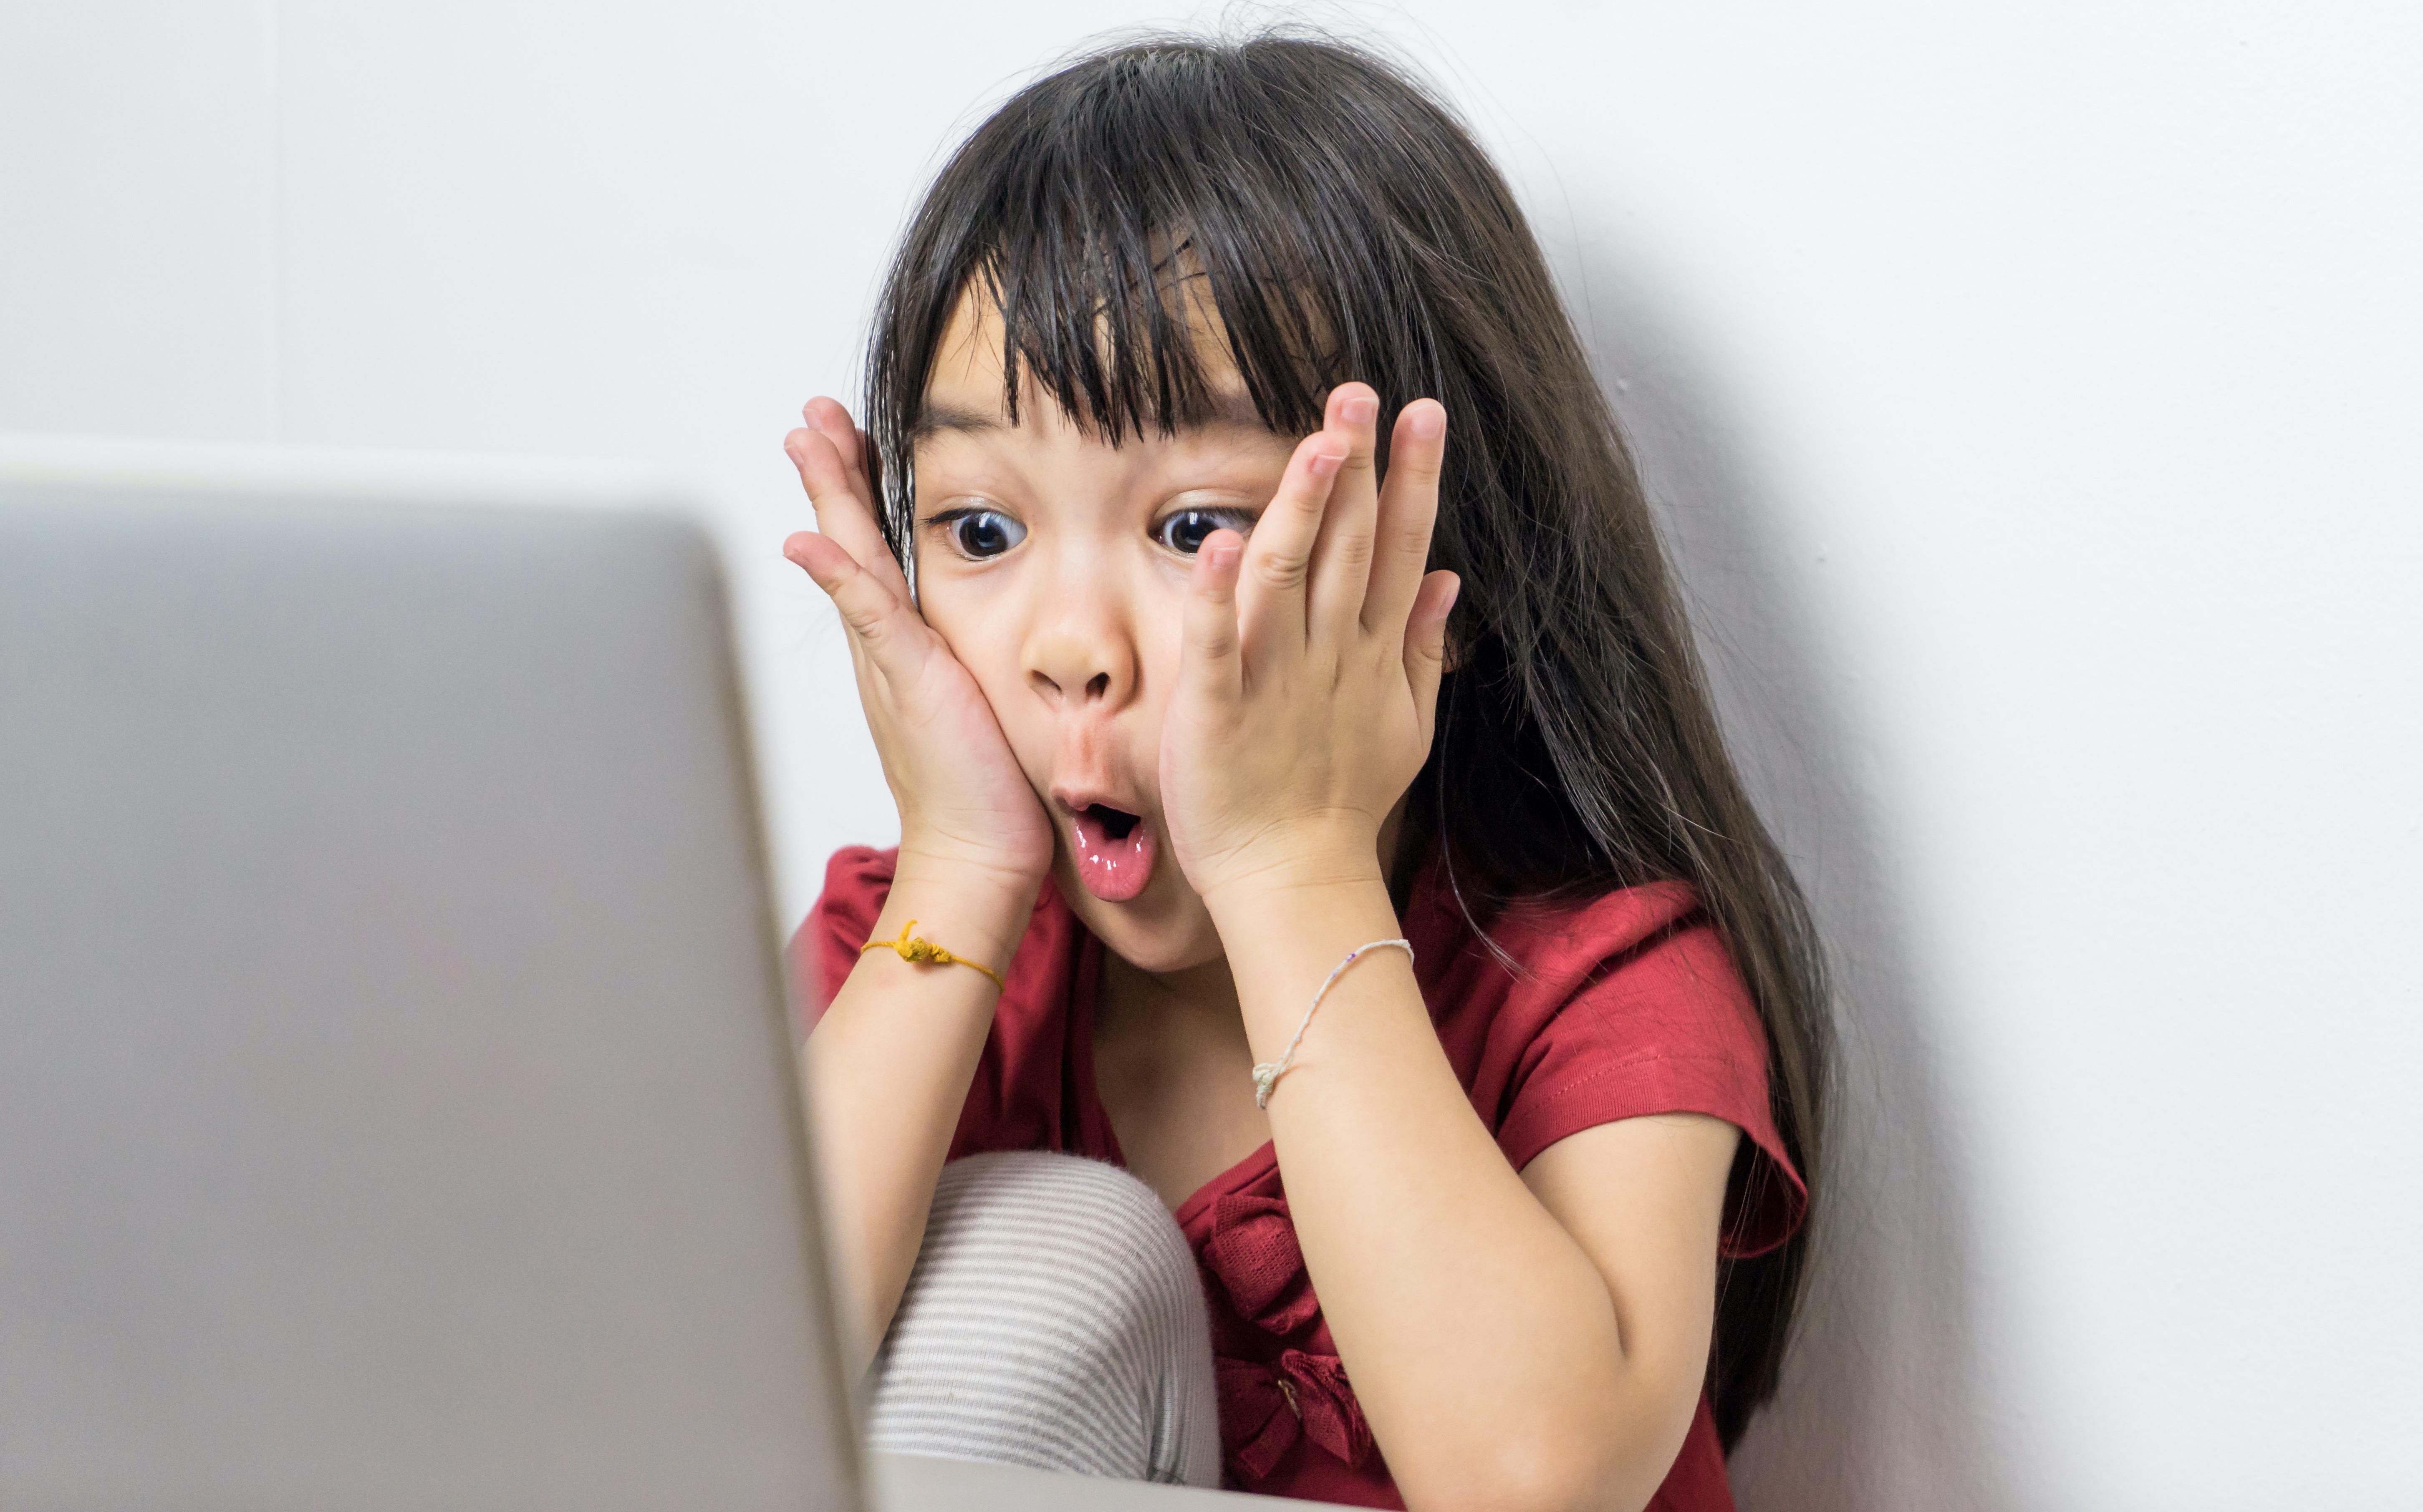 Little girl shocked by what she finds on the Internet